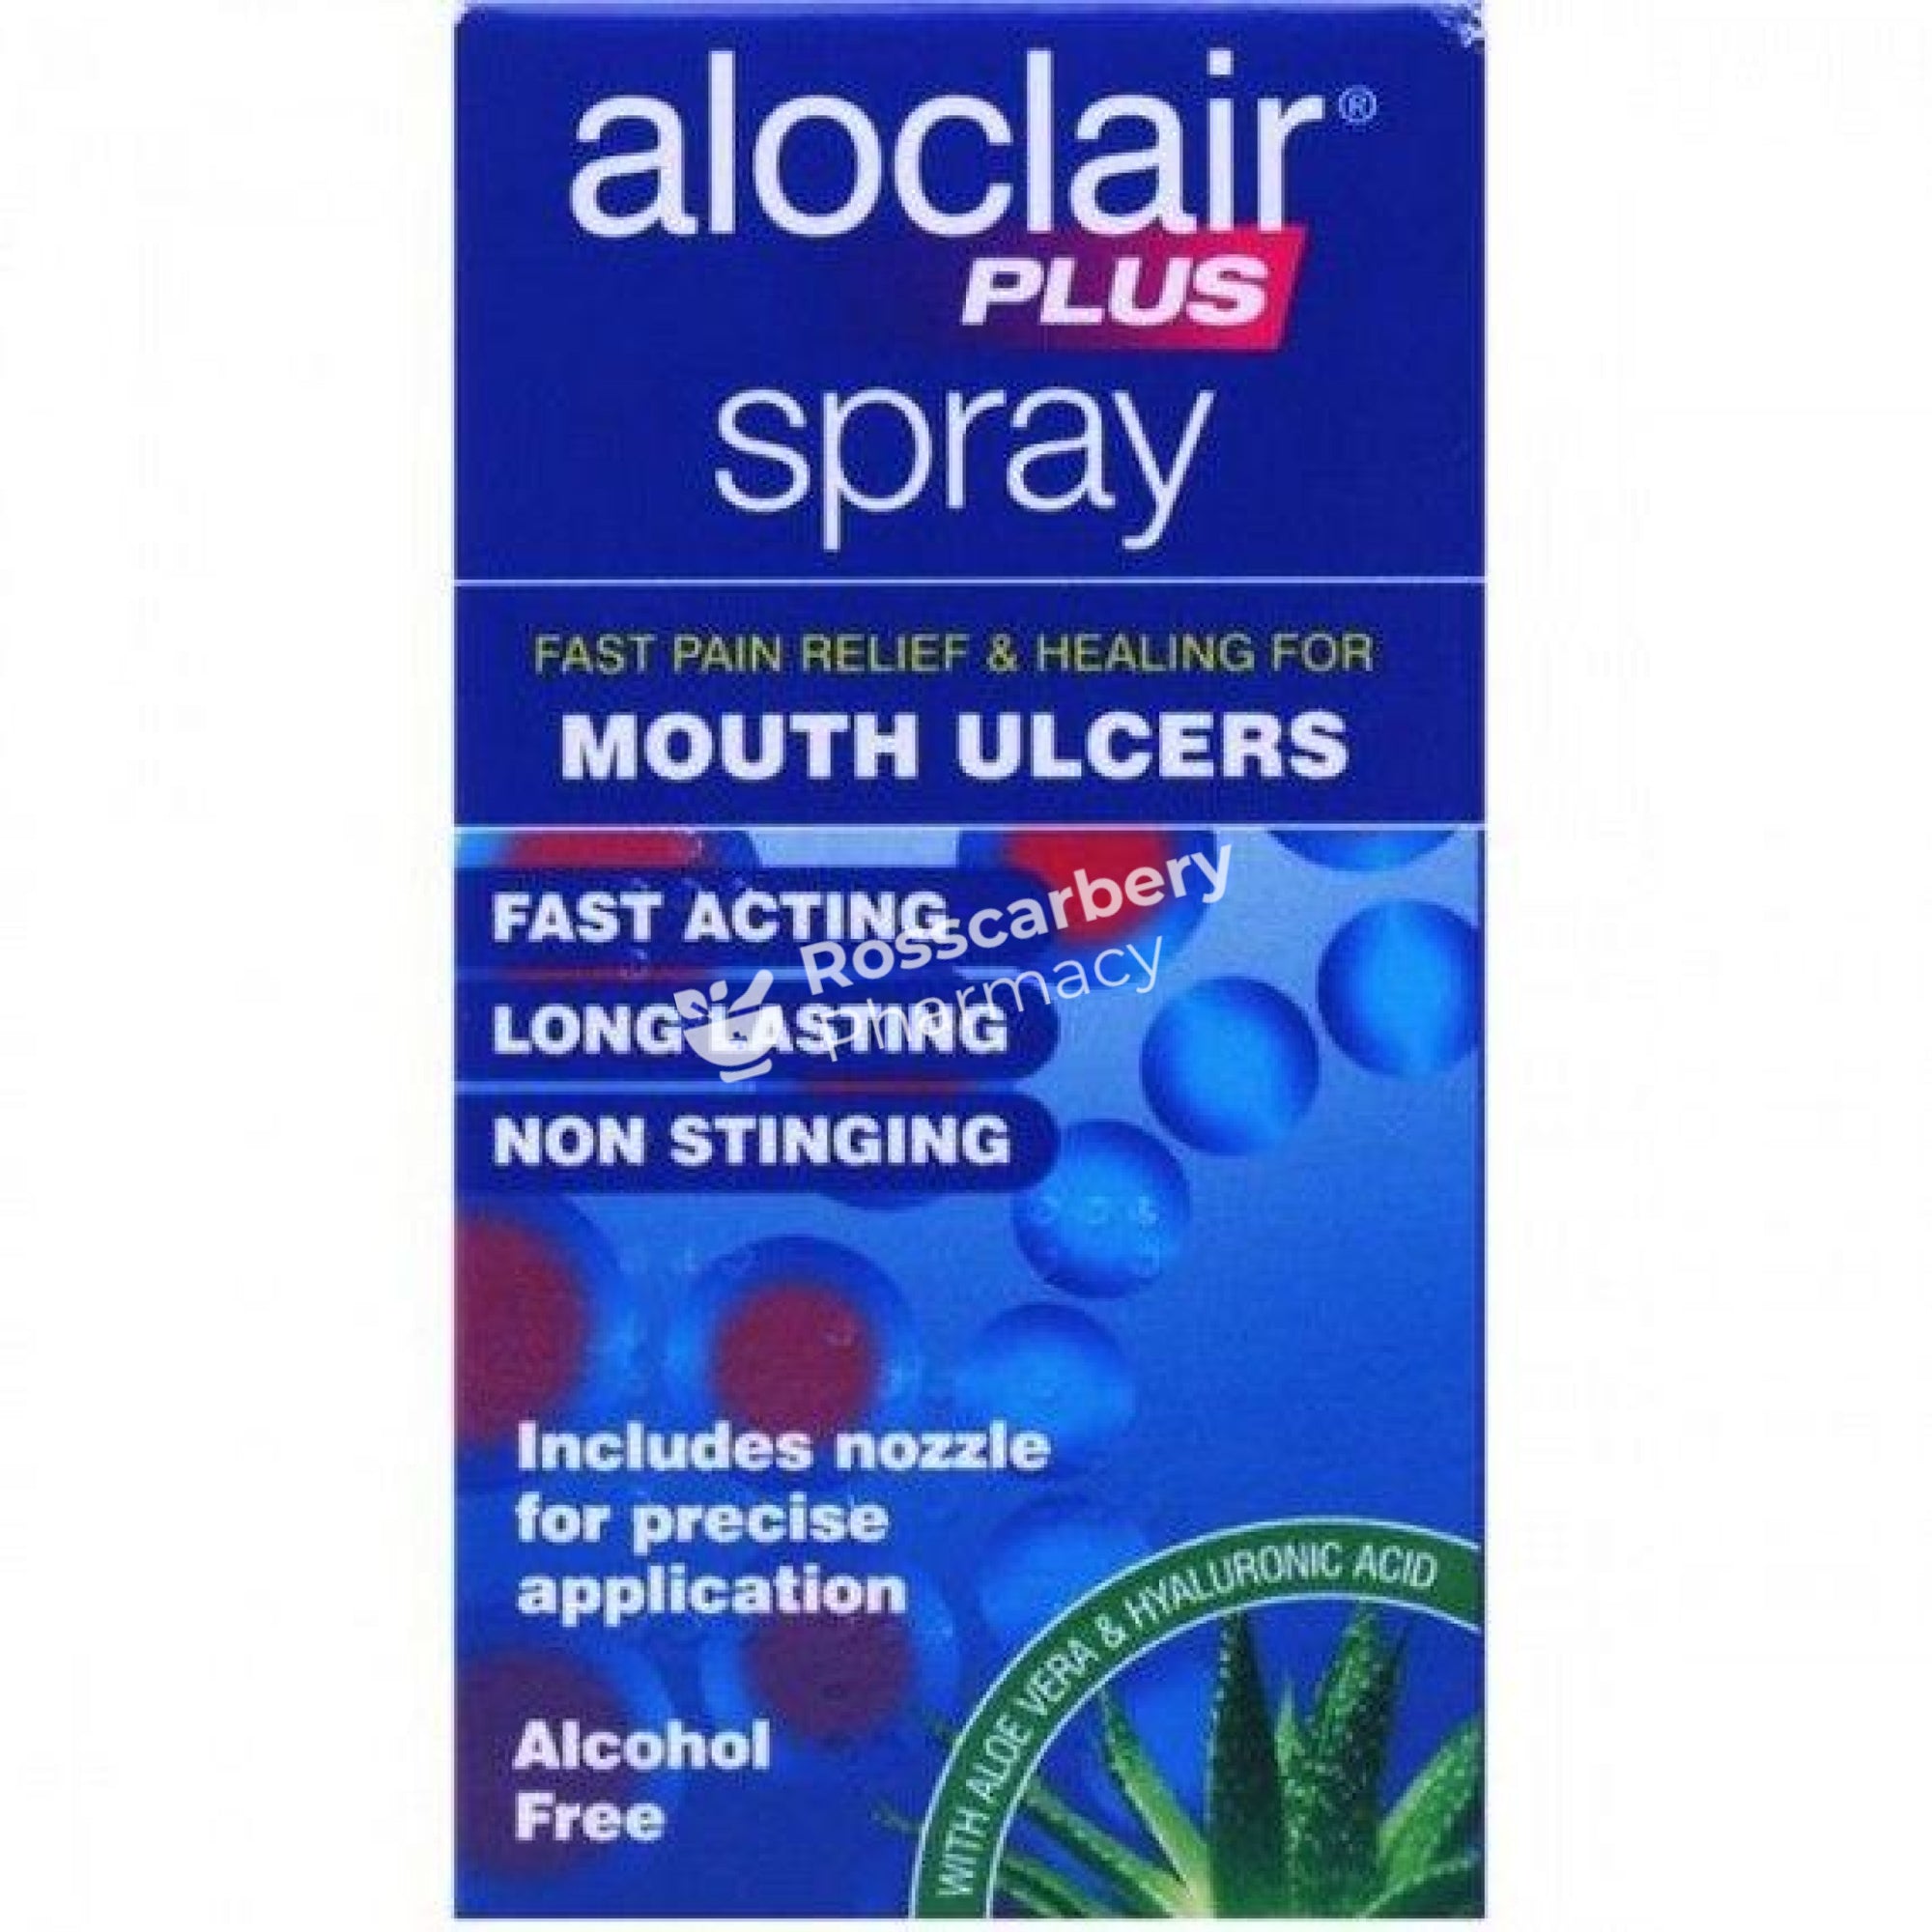 Aloclair Plus Spray - Pain Relief & Healing From Mouth Ulcers Cold Sores